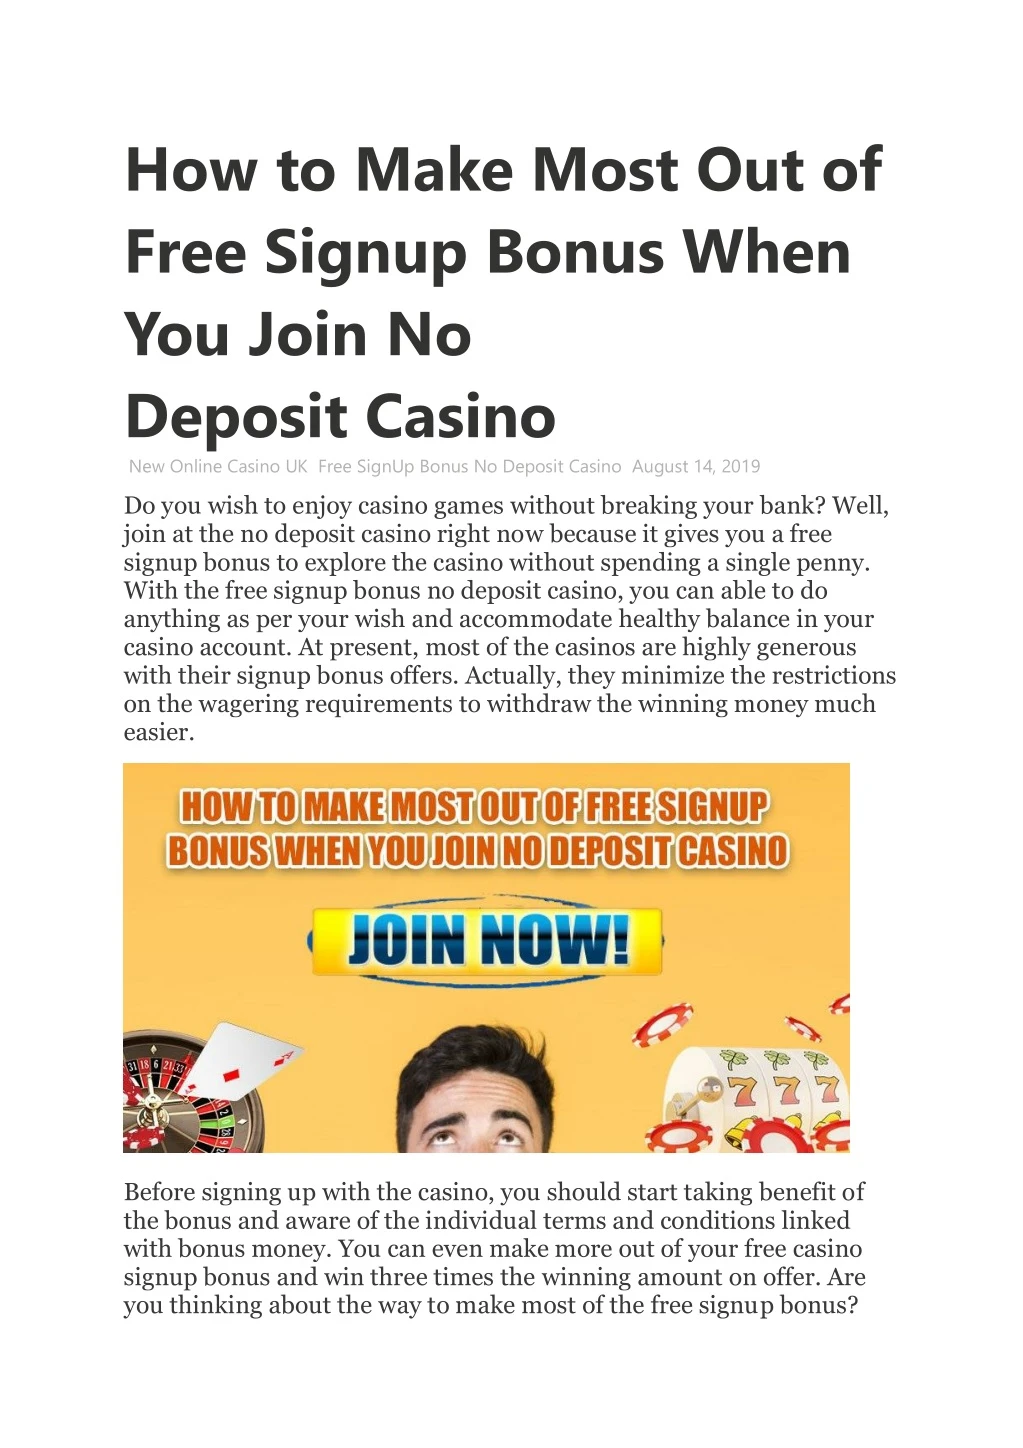 how to make most out of free signup bonus when